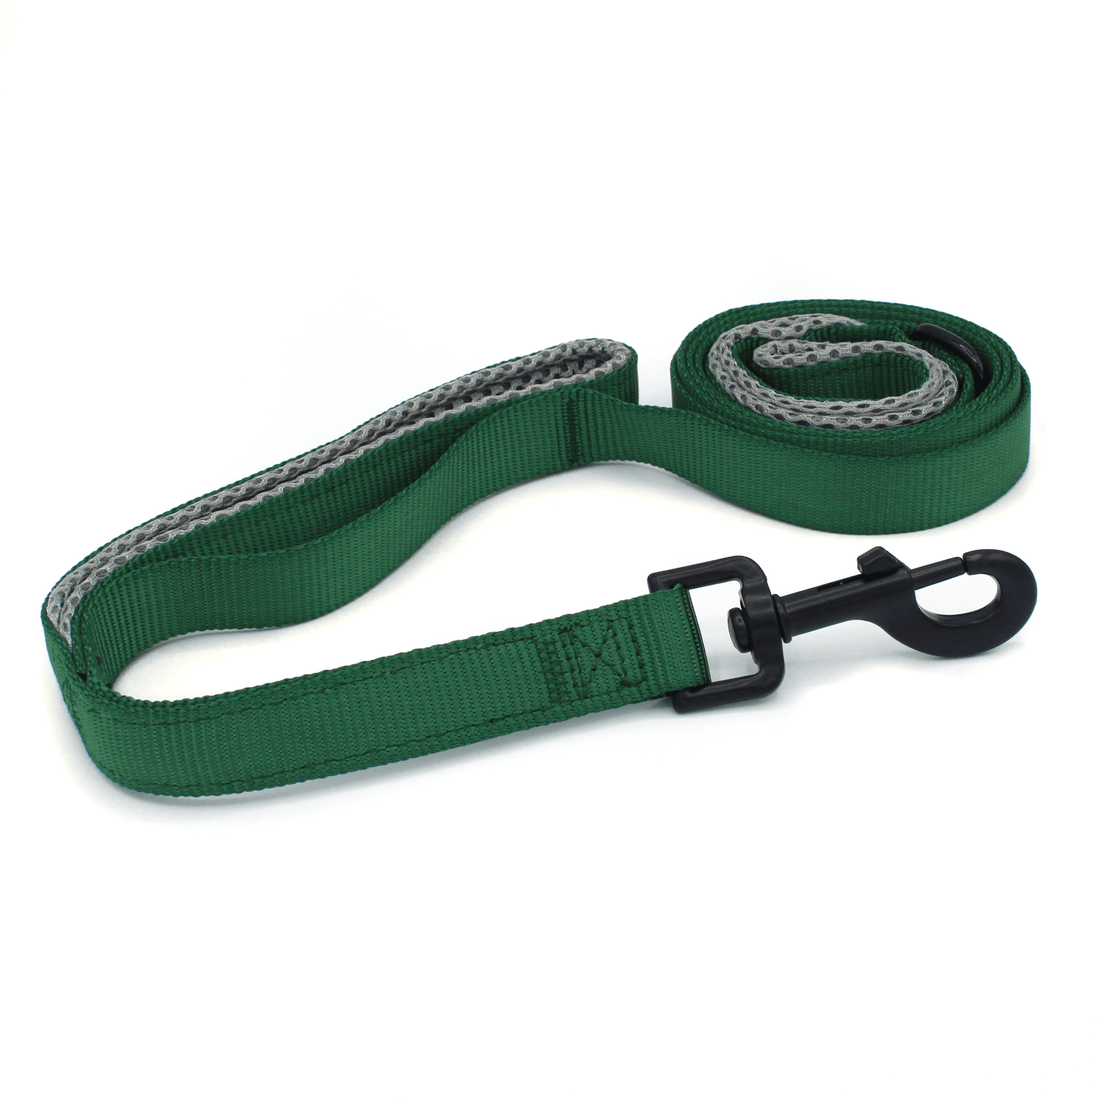 a dark green dog leash with black hardware and light grey padded handles